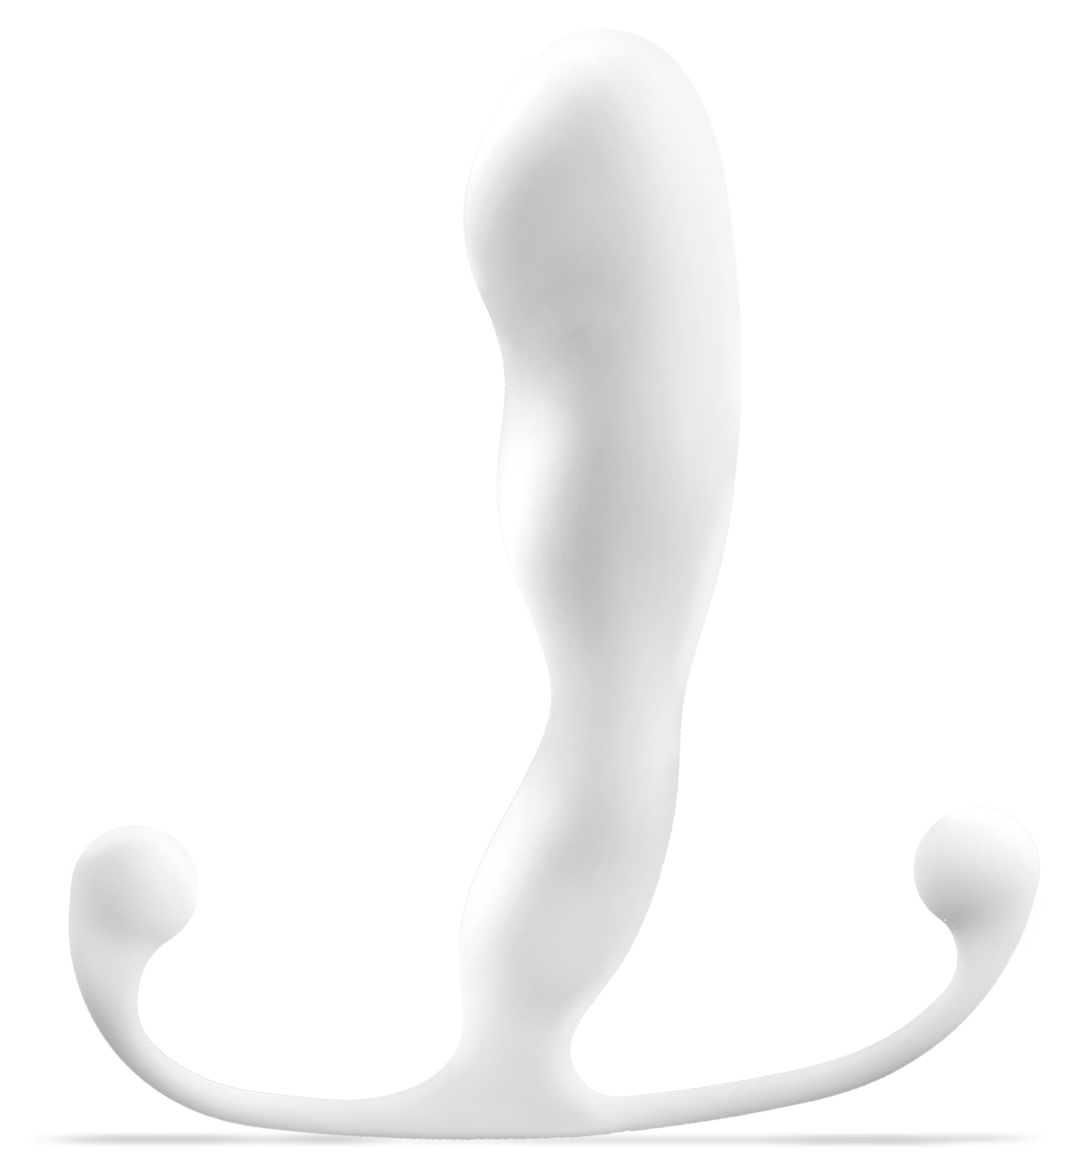 The white Aneros Helix Trident Prostate Massager.